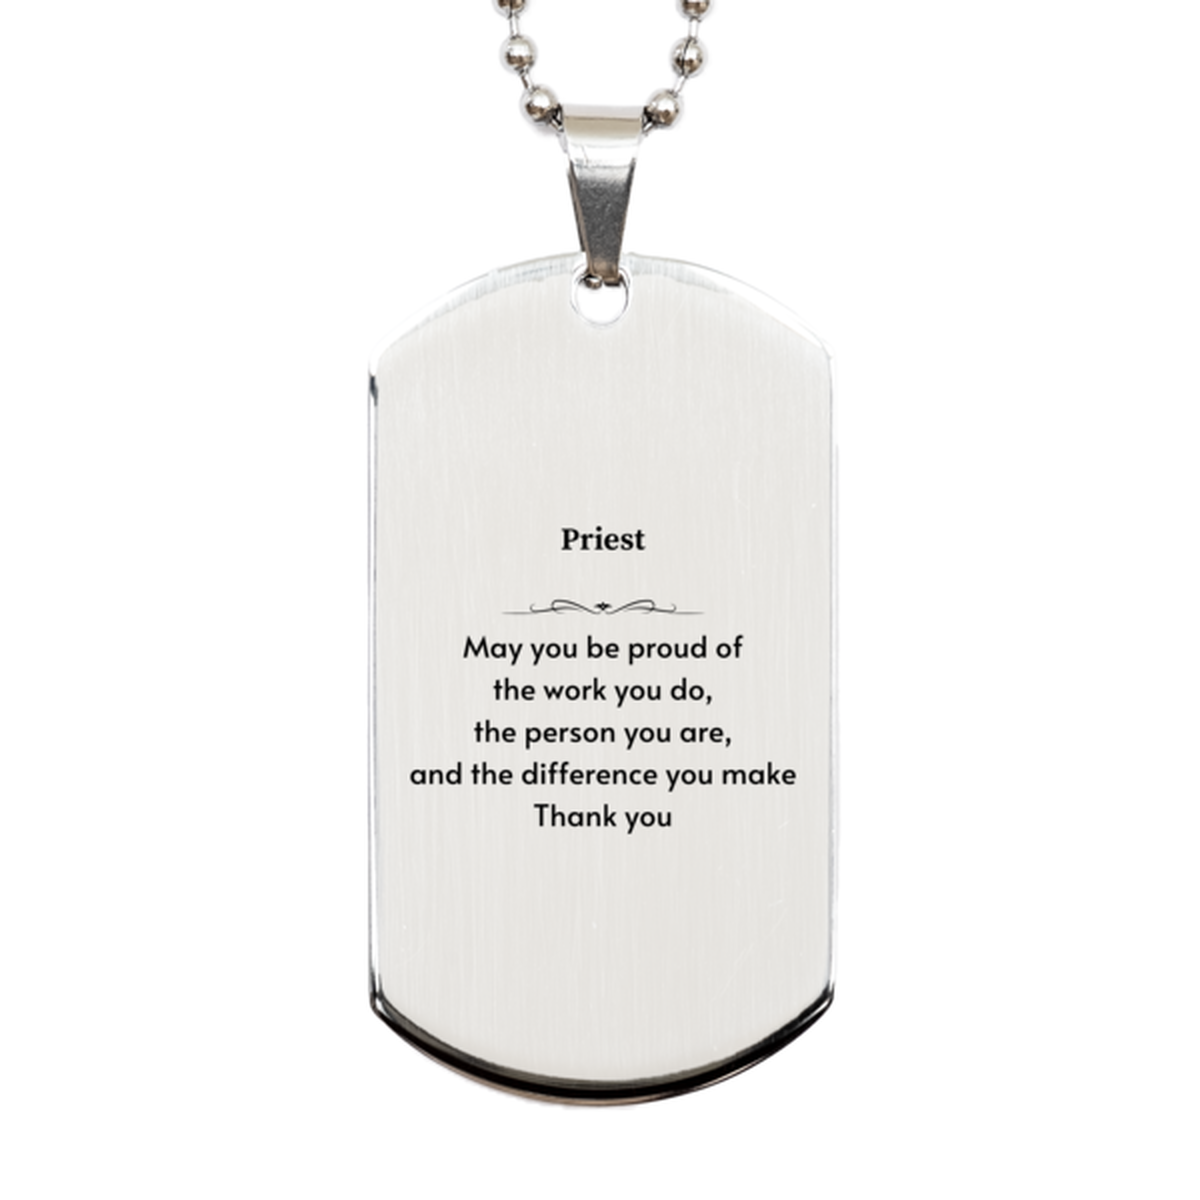 Heartwarming Silver Dog Tag Retirement Coworkers Gifts for Priest, Priest May You be proud of the work you do, the person you are Gifts for Boss Men Women Friends